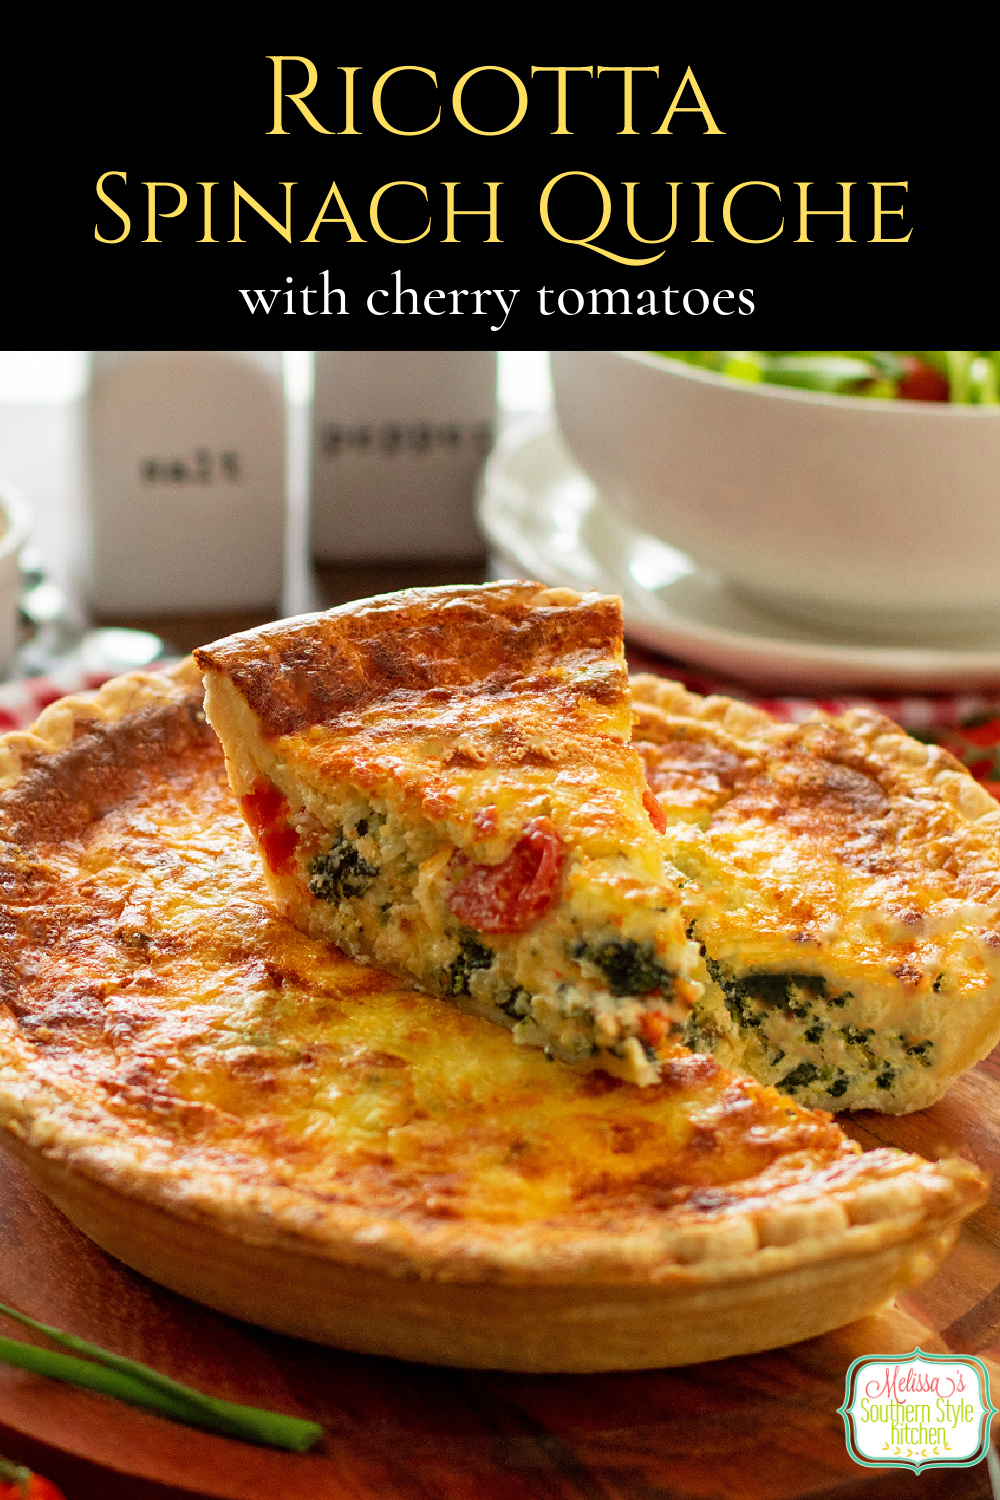 This easy homemade Ricotta Spinach Quiche recipe is a tasty main dish option for breakfast, brunch, lunch or dinner. #quiche #quicherecipes #spinachquiche #ricottaquiche #Italian #ricottarecipe #spinach #holidaybrunchrecipes